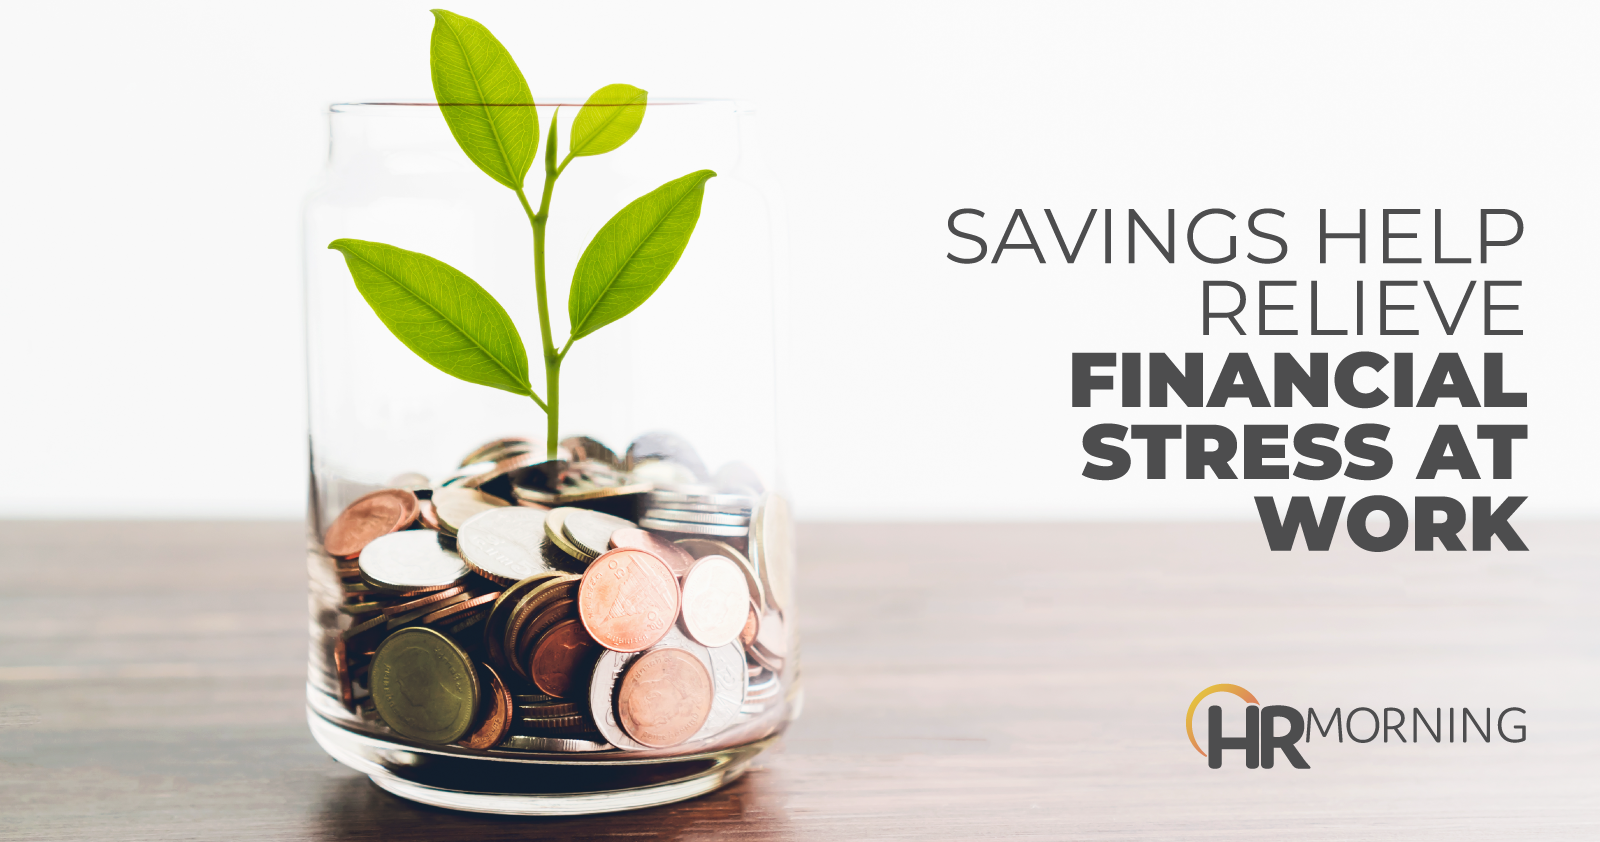 Savings Help Relieve Financial Stress At Work